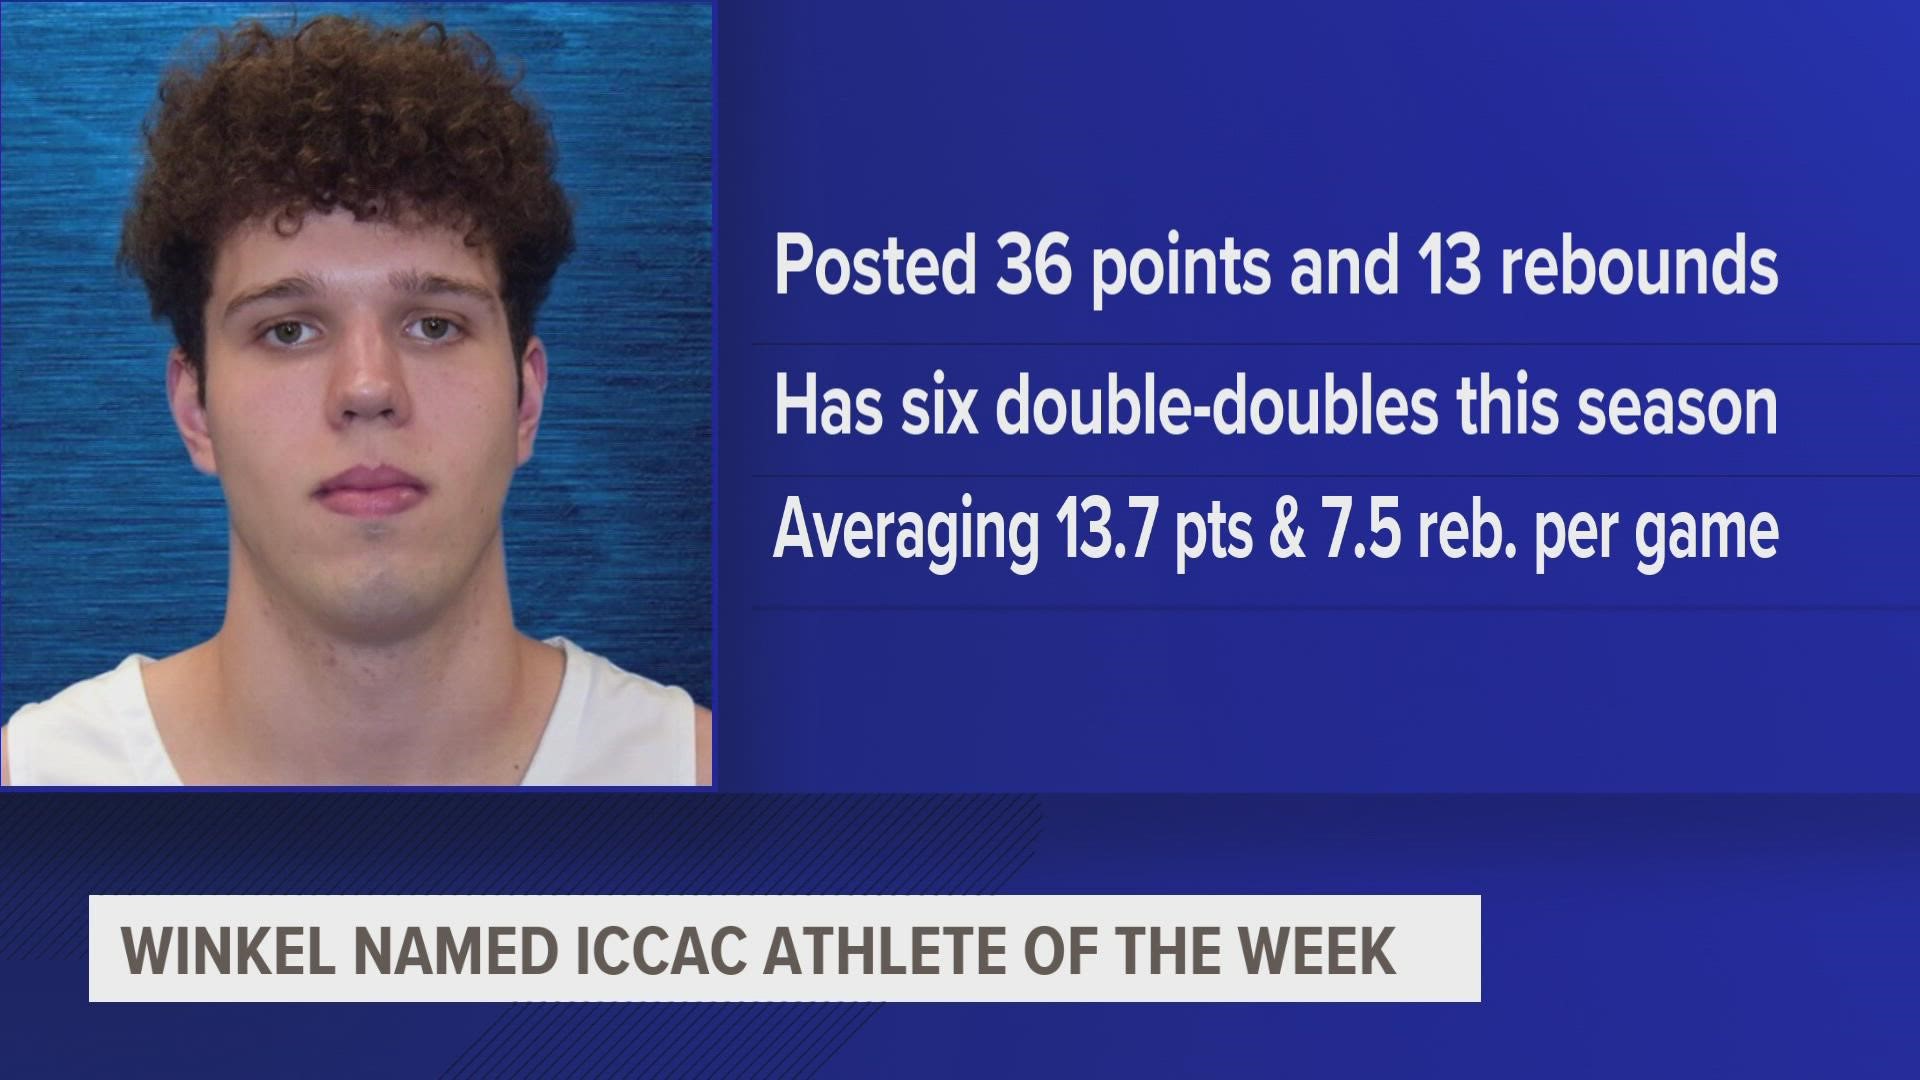 DMACC's Angelo Winkel is coming off of a big week where he totaled 36 points and 13 rebounds 
over his last two games.